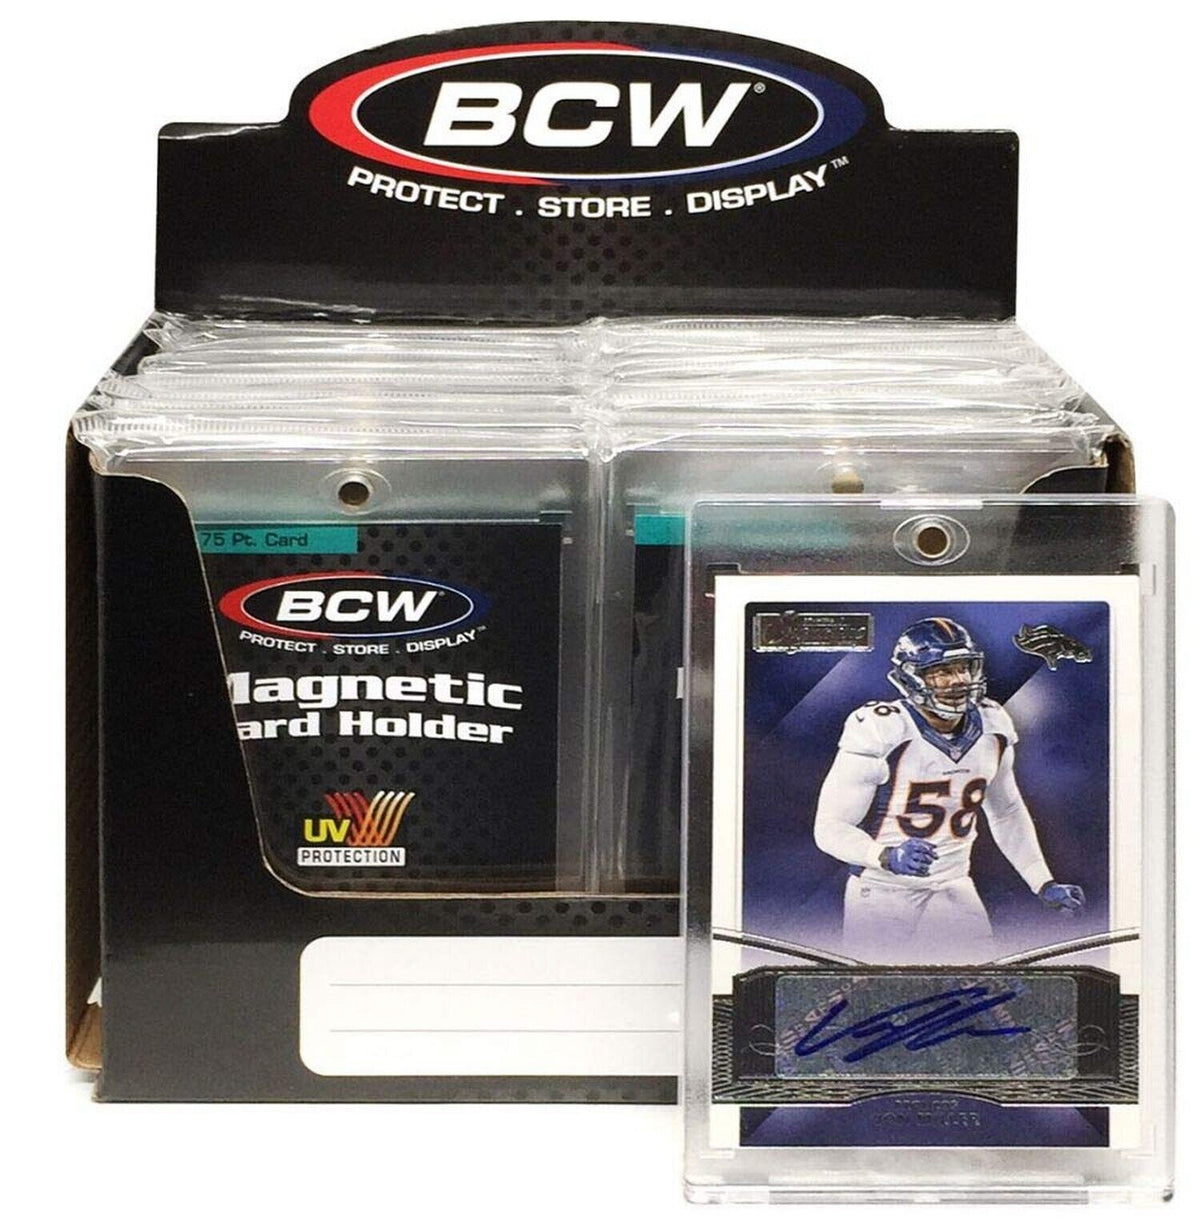 BCW Magnetic Card Holder - 75 PT (Loose 1 Pcs)-BCW Supplies-Ace Cards &amp; Collectibles